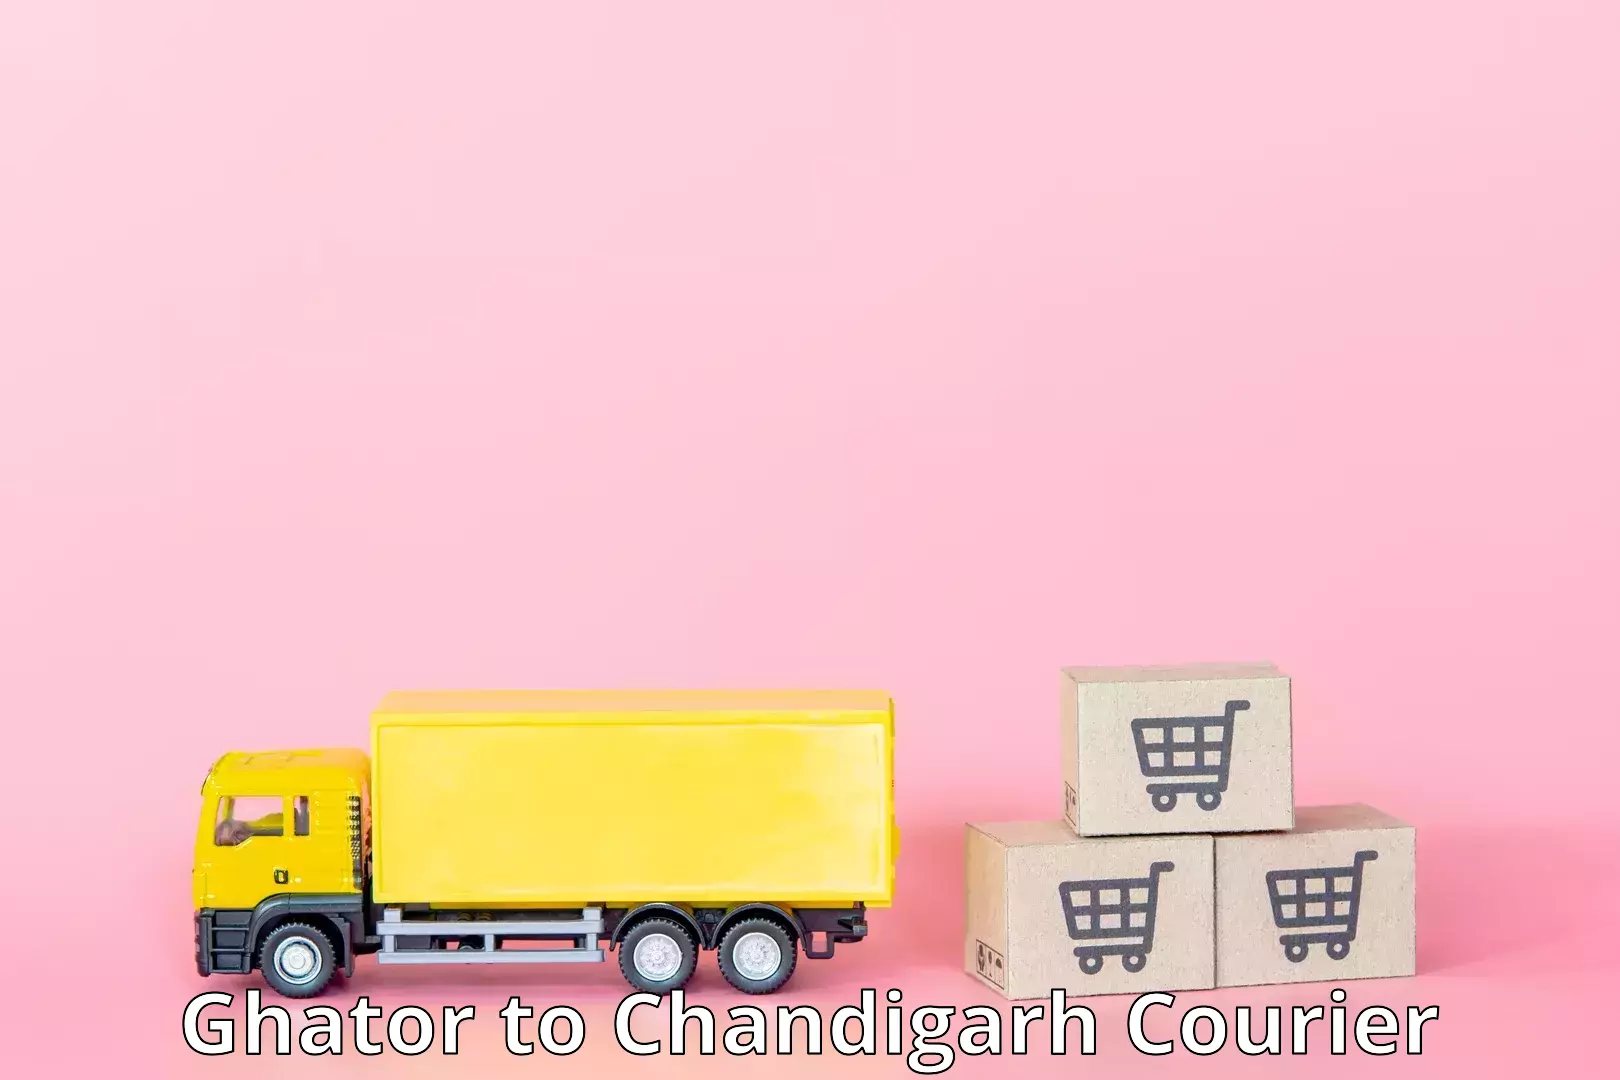 Comprehensive shipping network Ghator to Chandigarh